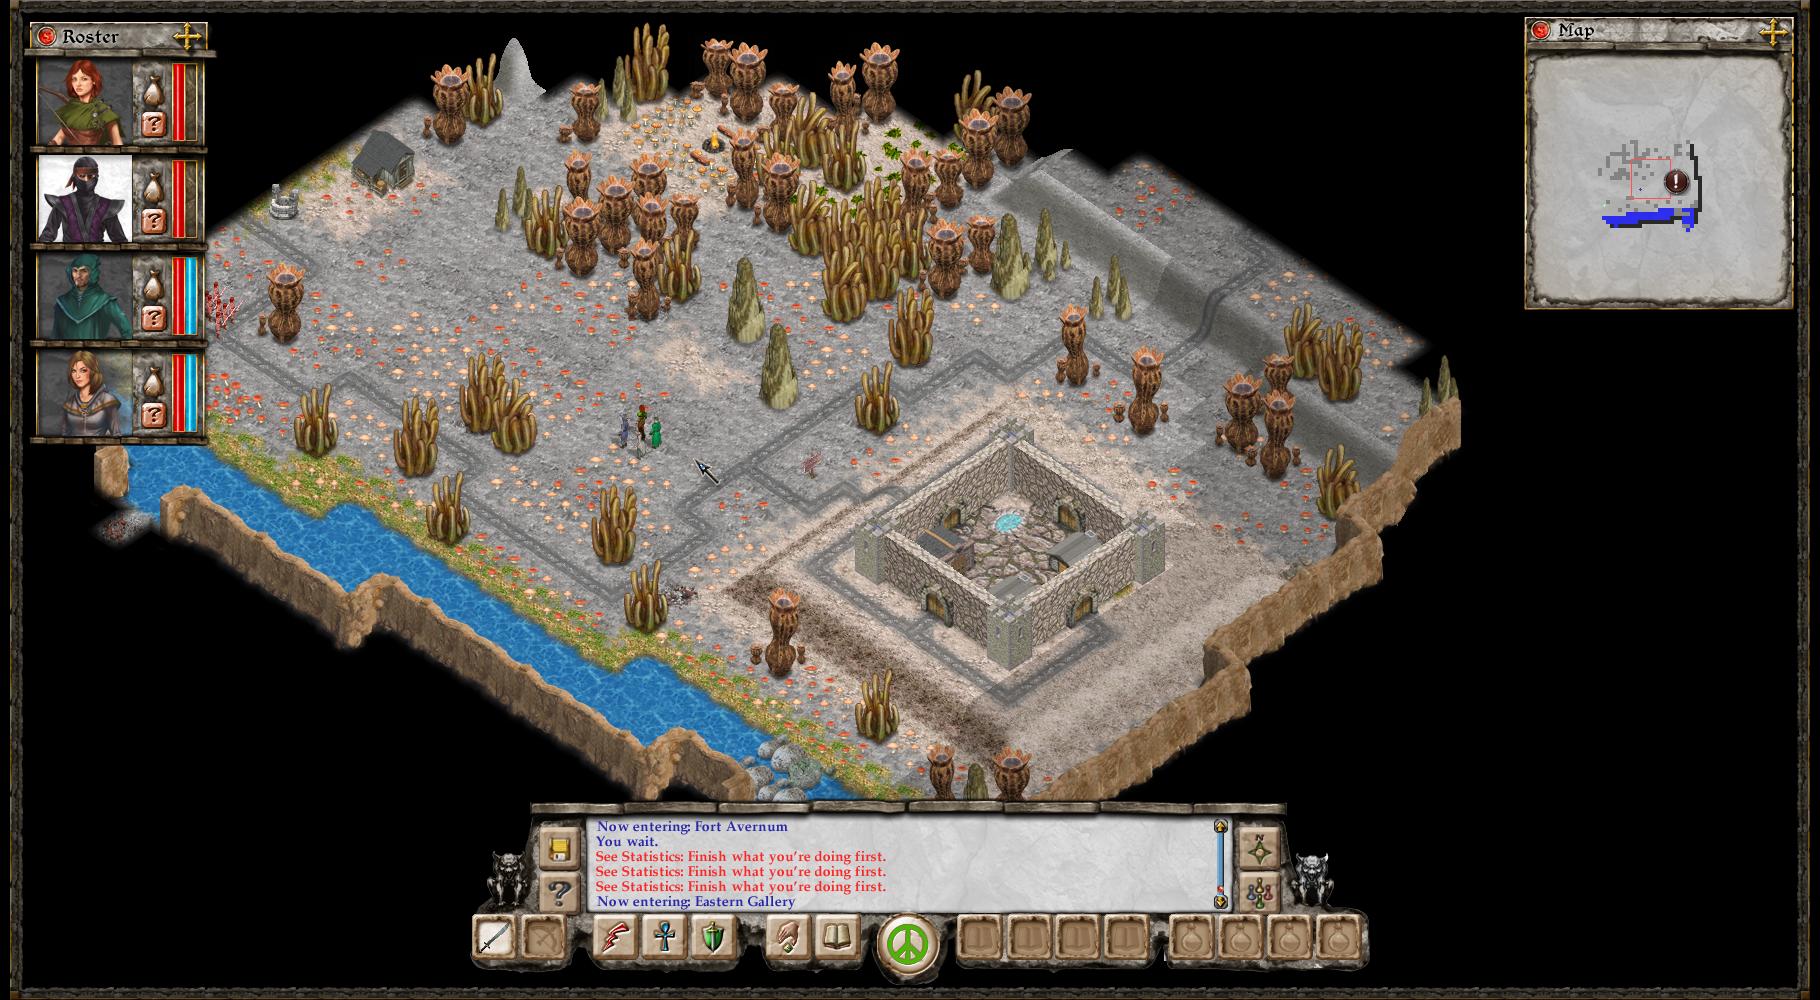 Avernum Escape From the Pit for mac download